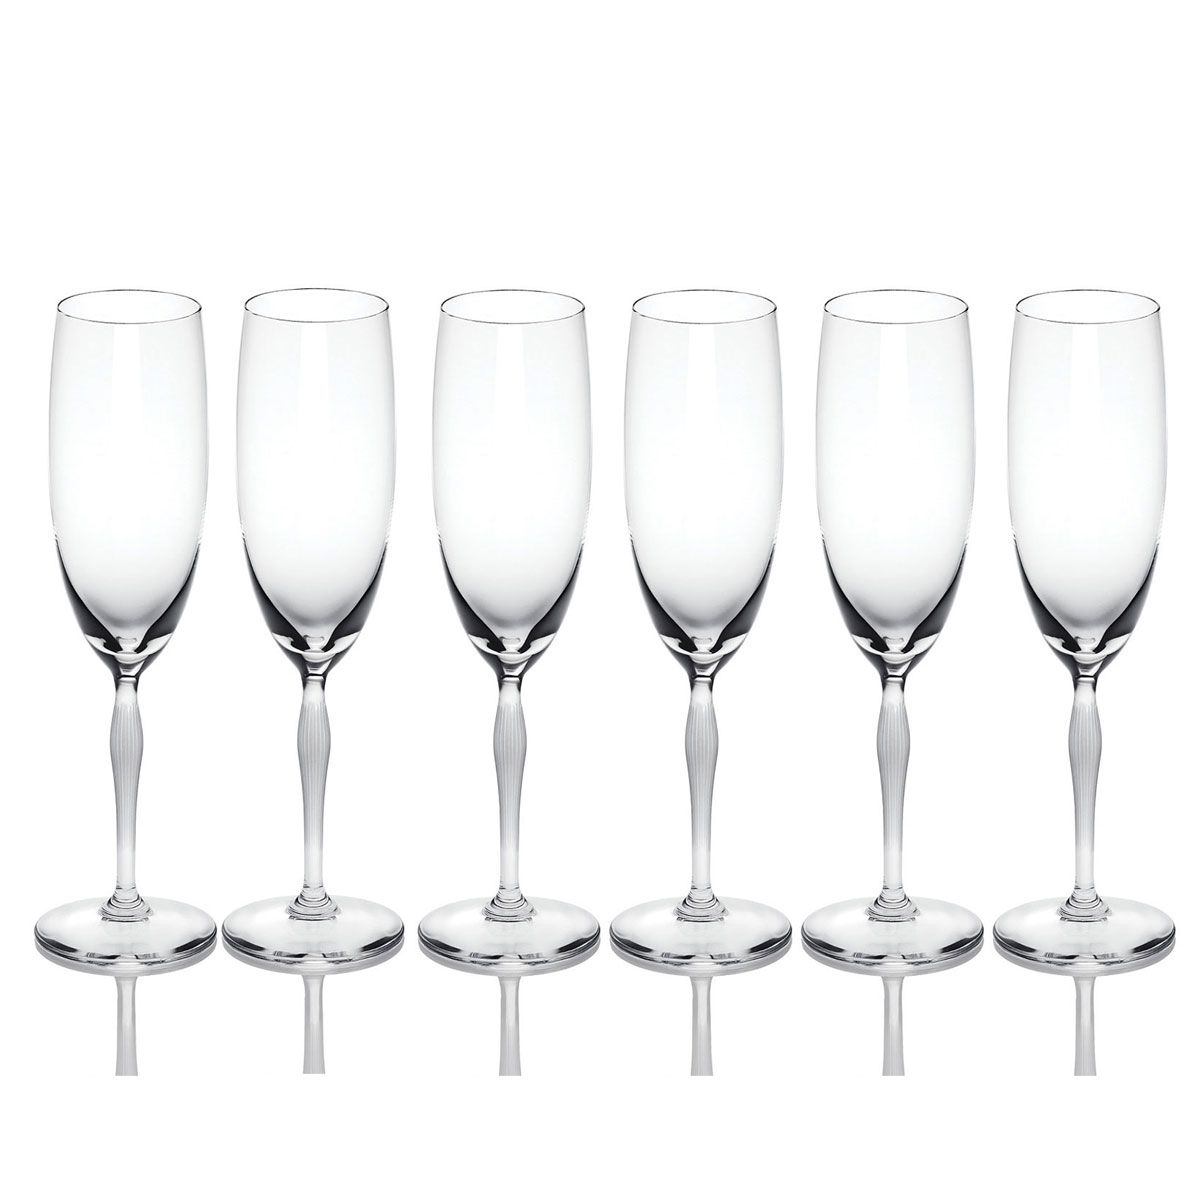 Lalique 100 Points Toasting Flute Glass By James Suckling Set of 6